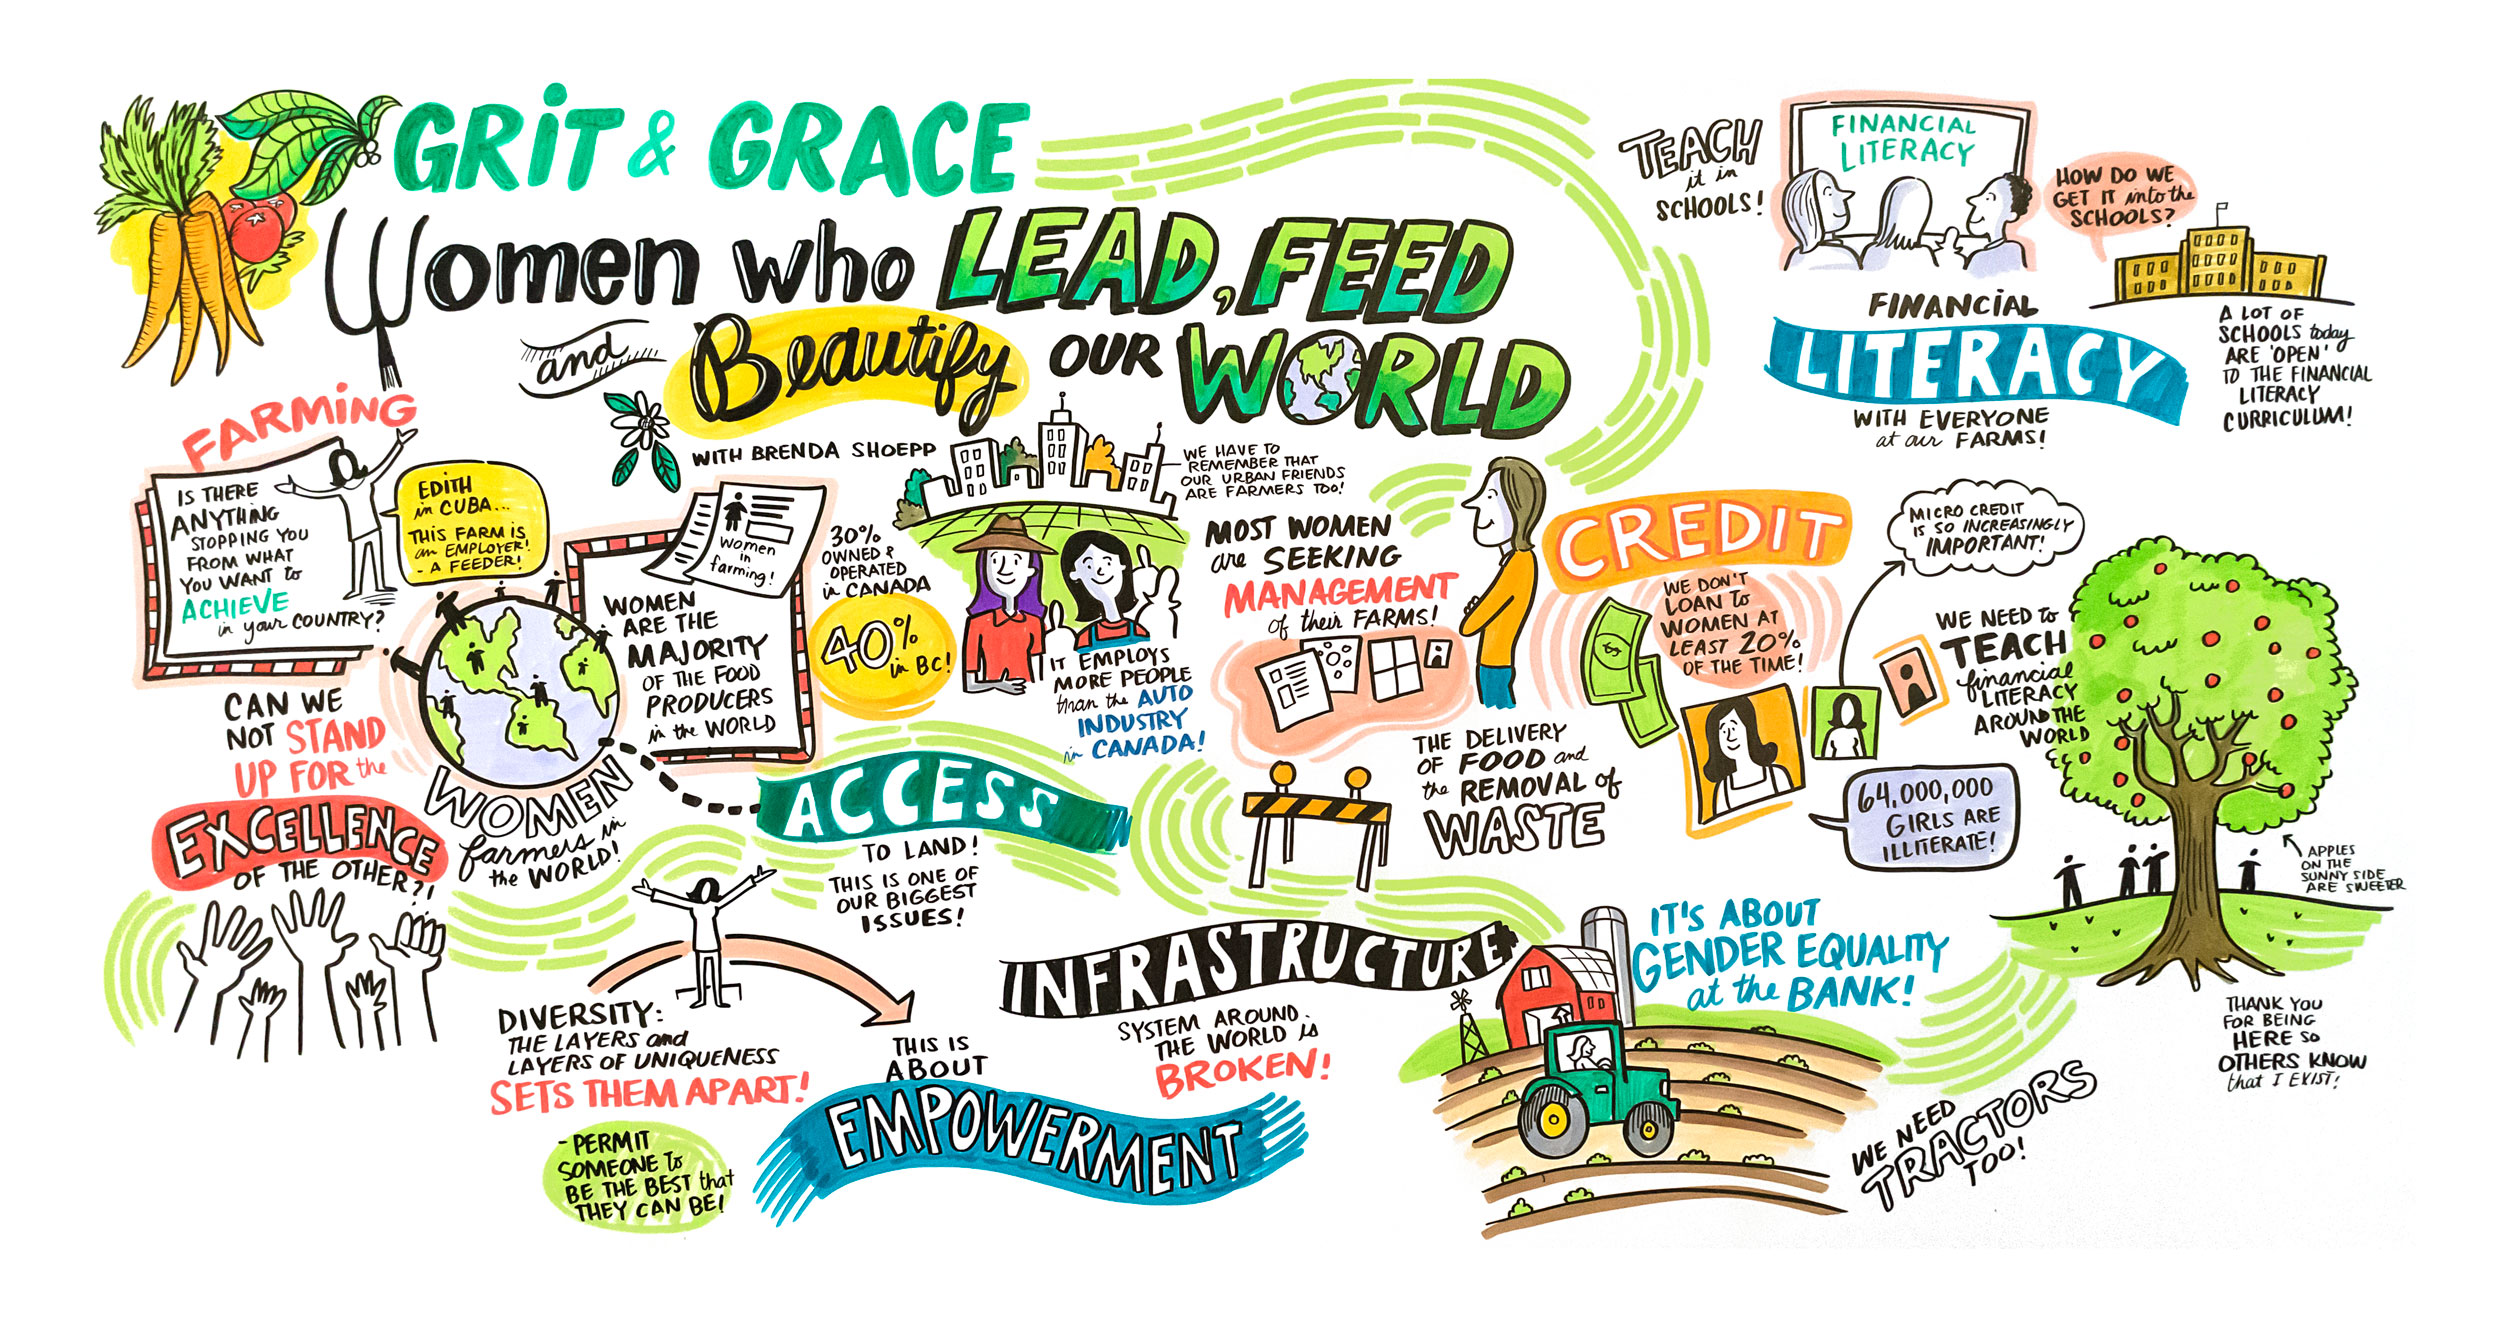 Grit & Grace - women who lead, feed and beautify our world